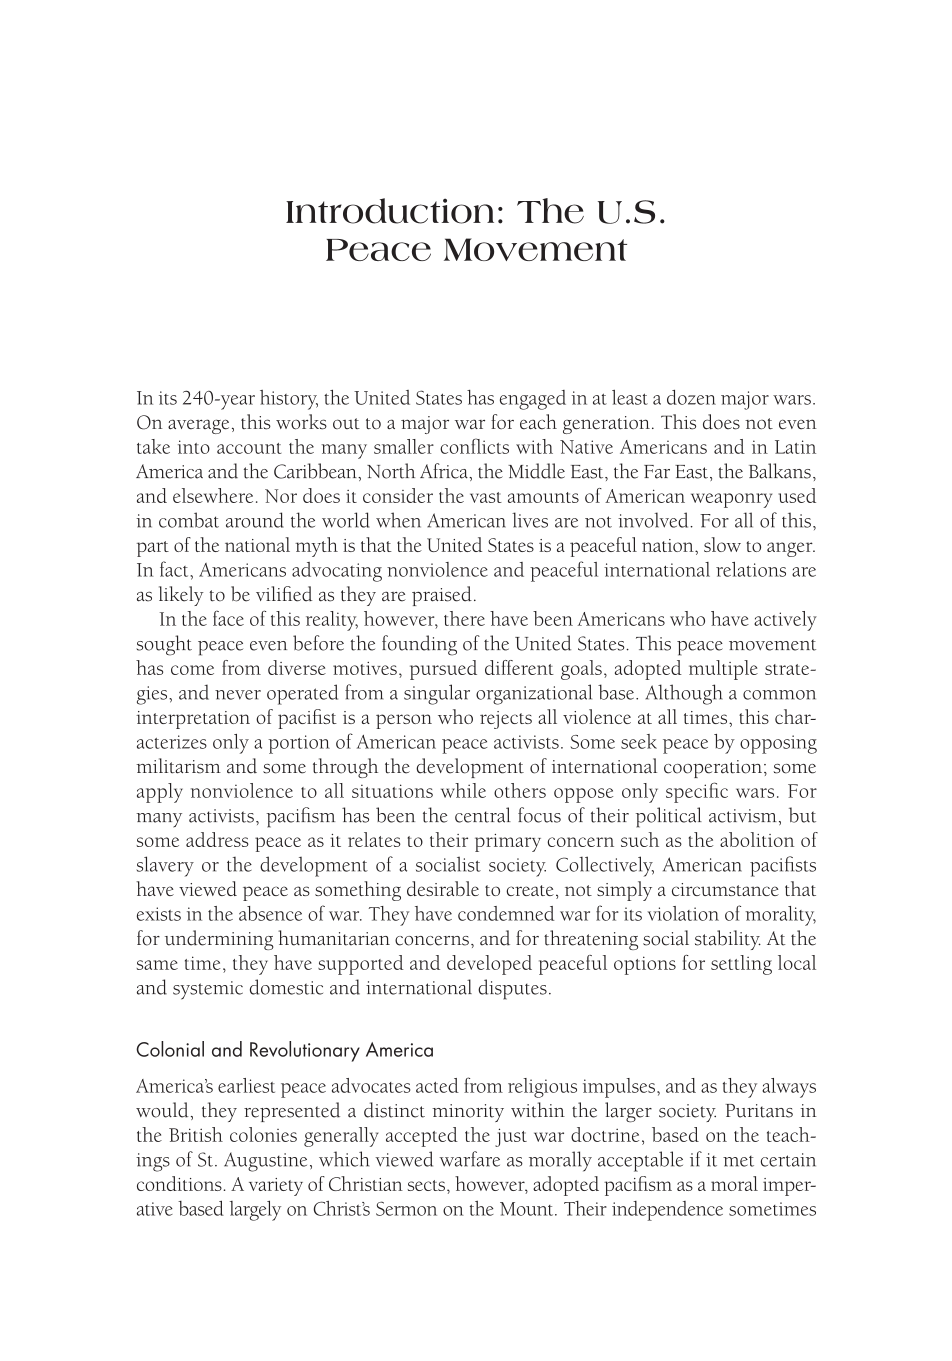 Opposition to War: An Encyclopedia of U.S. Peace and Antiwar Movements [2 volumes] page xxiii